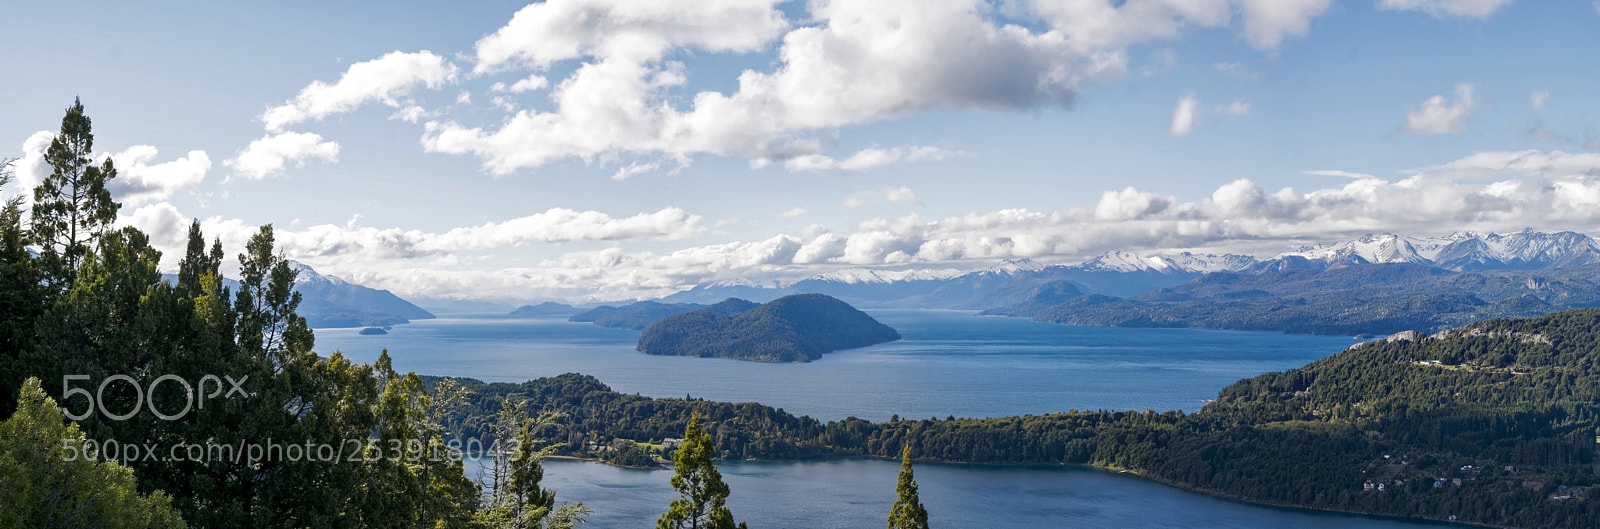 Nikon D7100 sample photo. Bariloche typical view photography